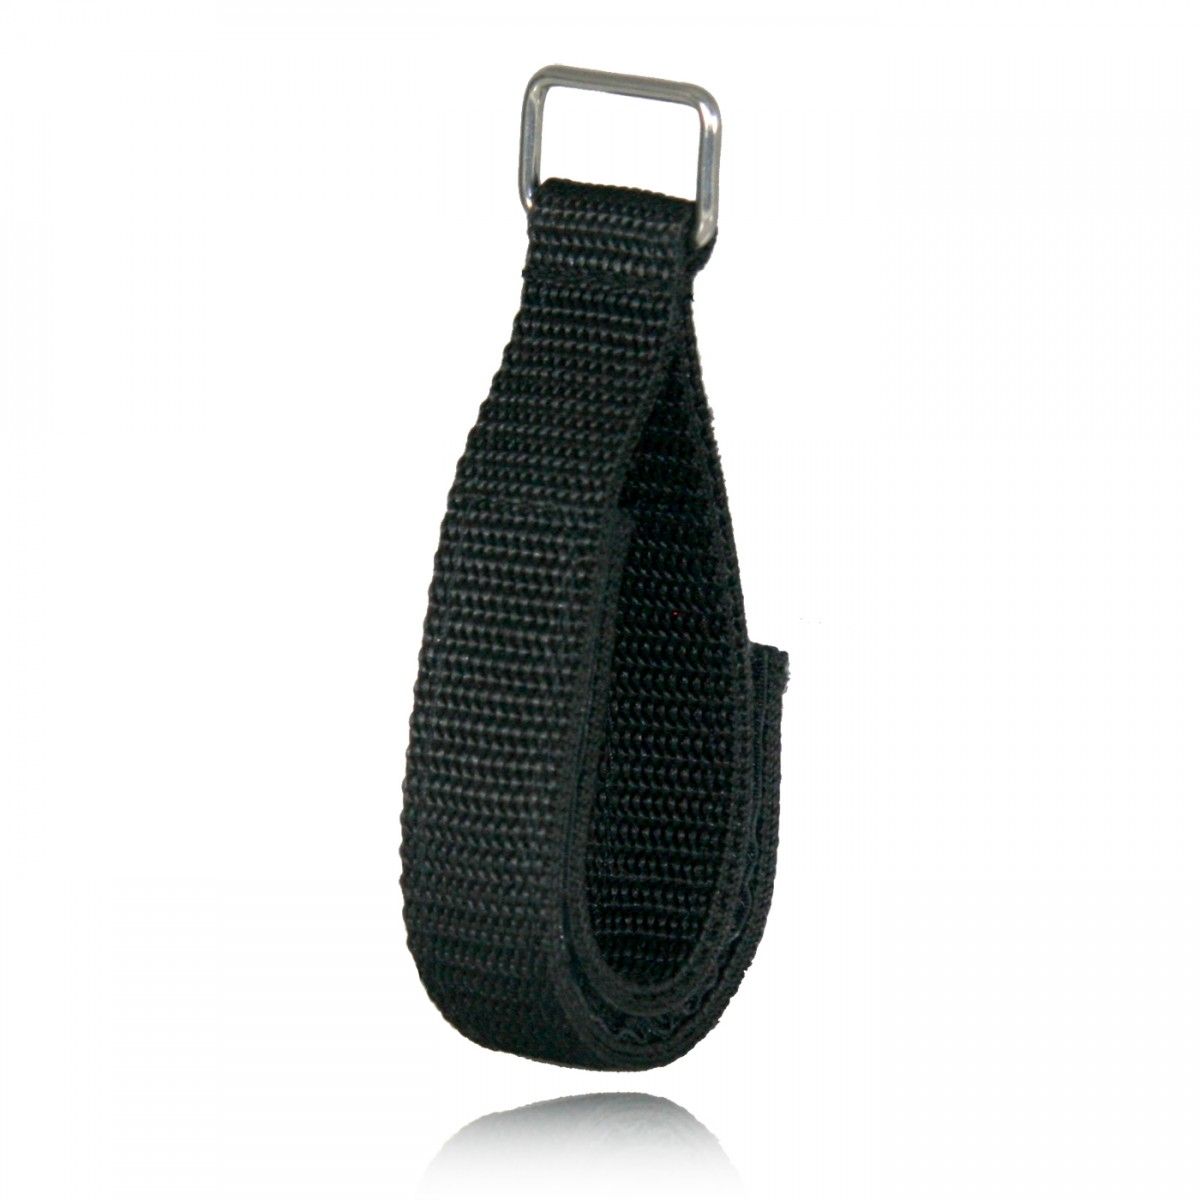 Firefighter’s Glove Strap with Square Ring, Ballistic Weave